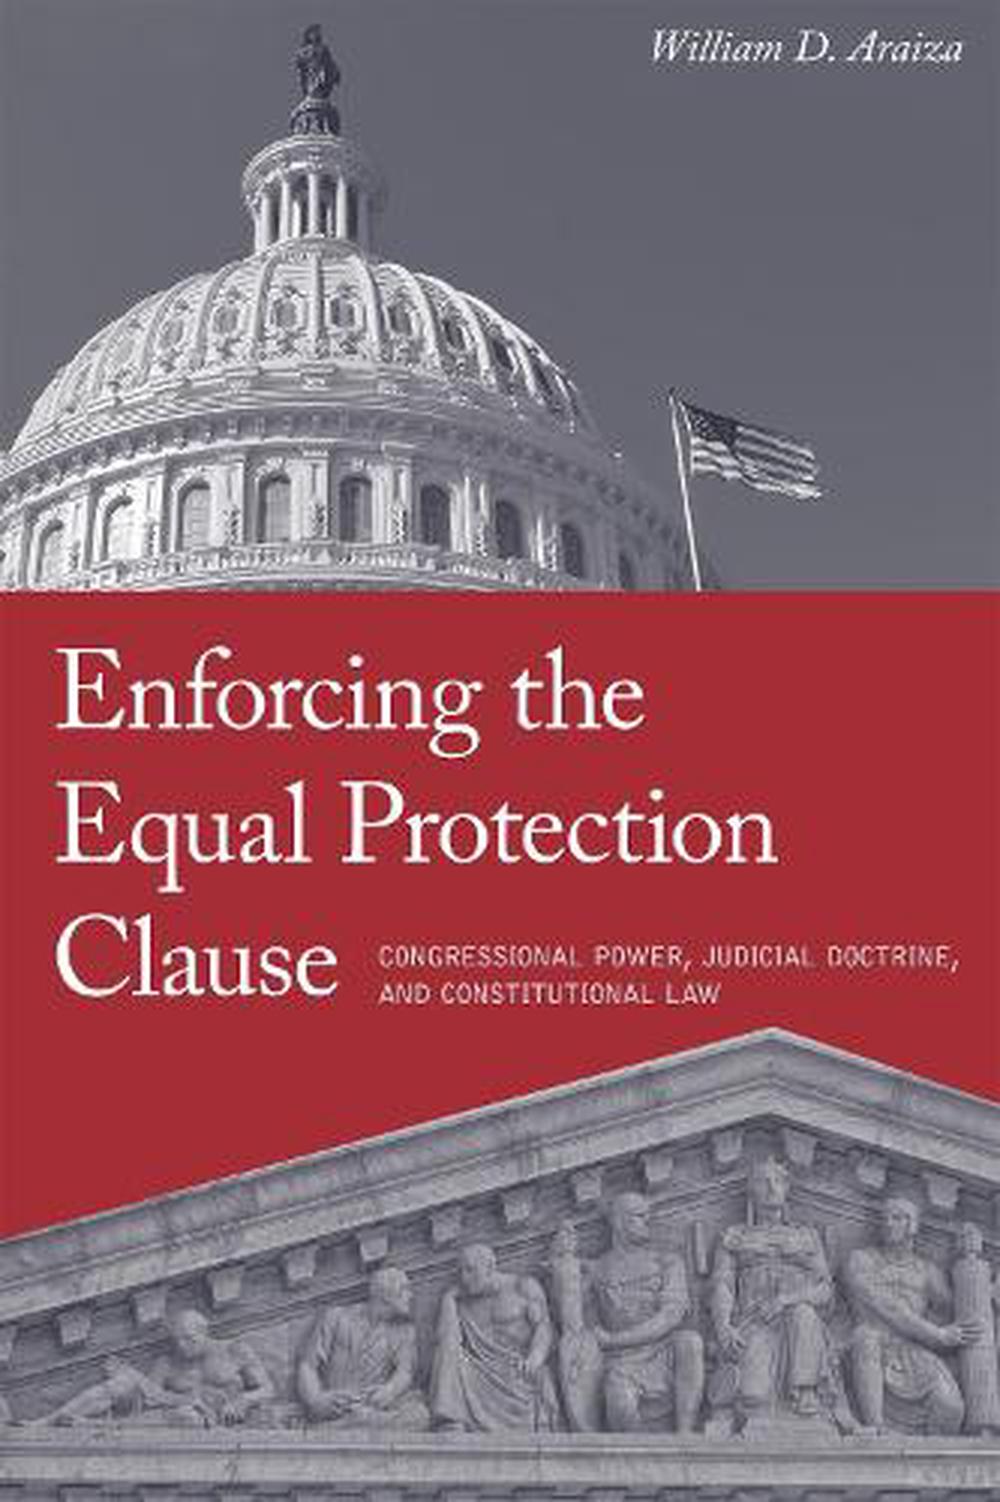 equal protection clause definition